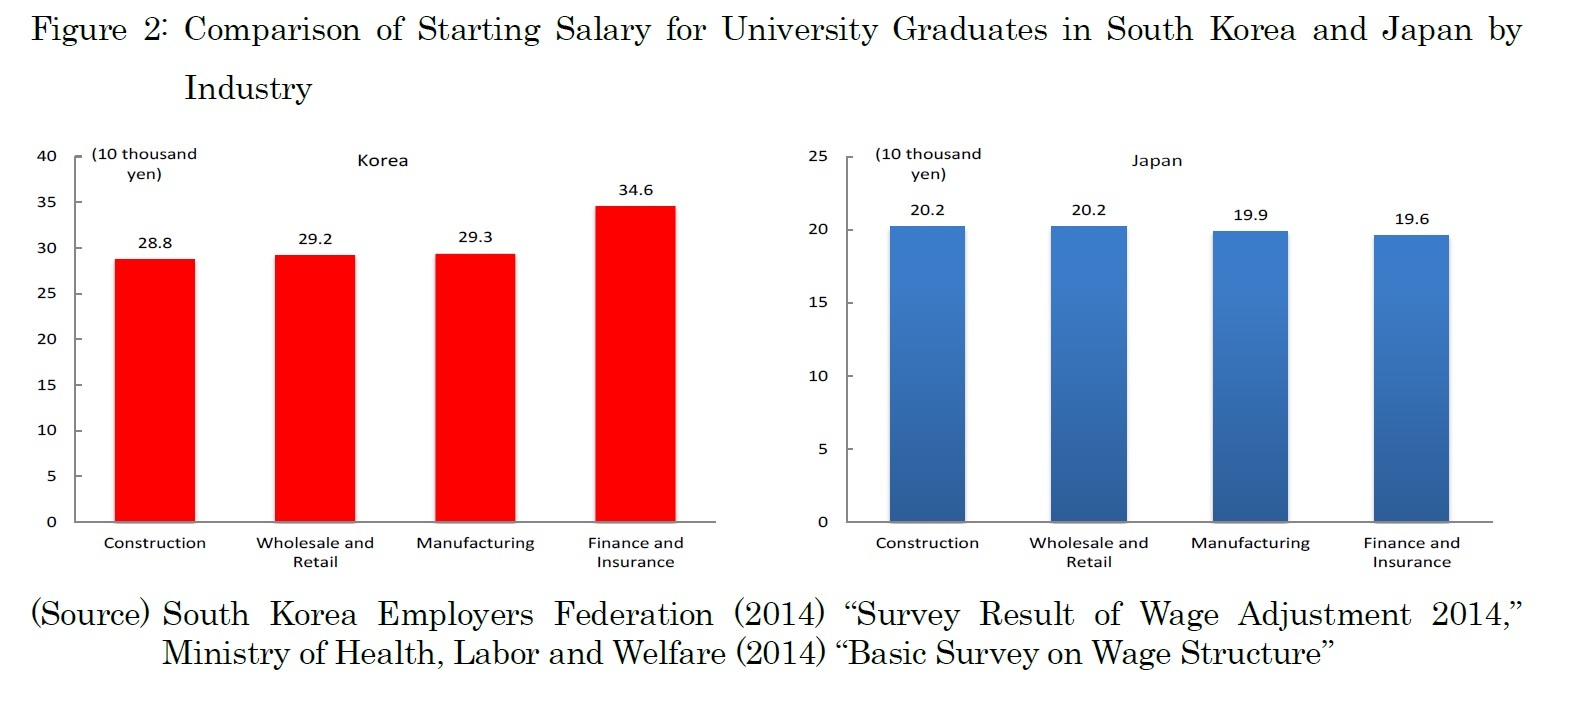 Figure 2: Comparison of Starting Salary for University Graduates in South Korea and Japan by Industry